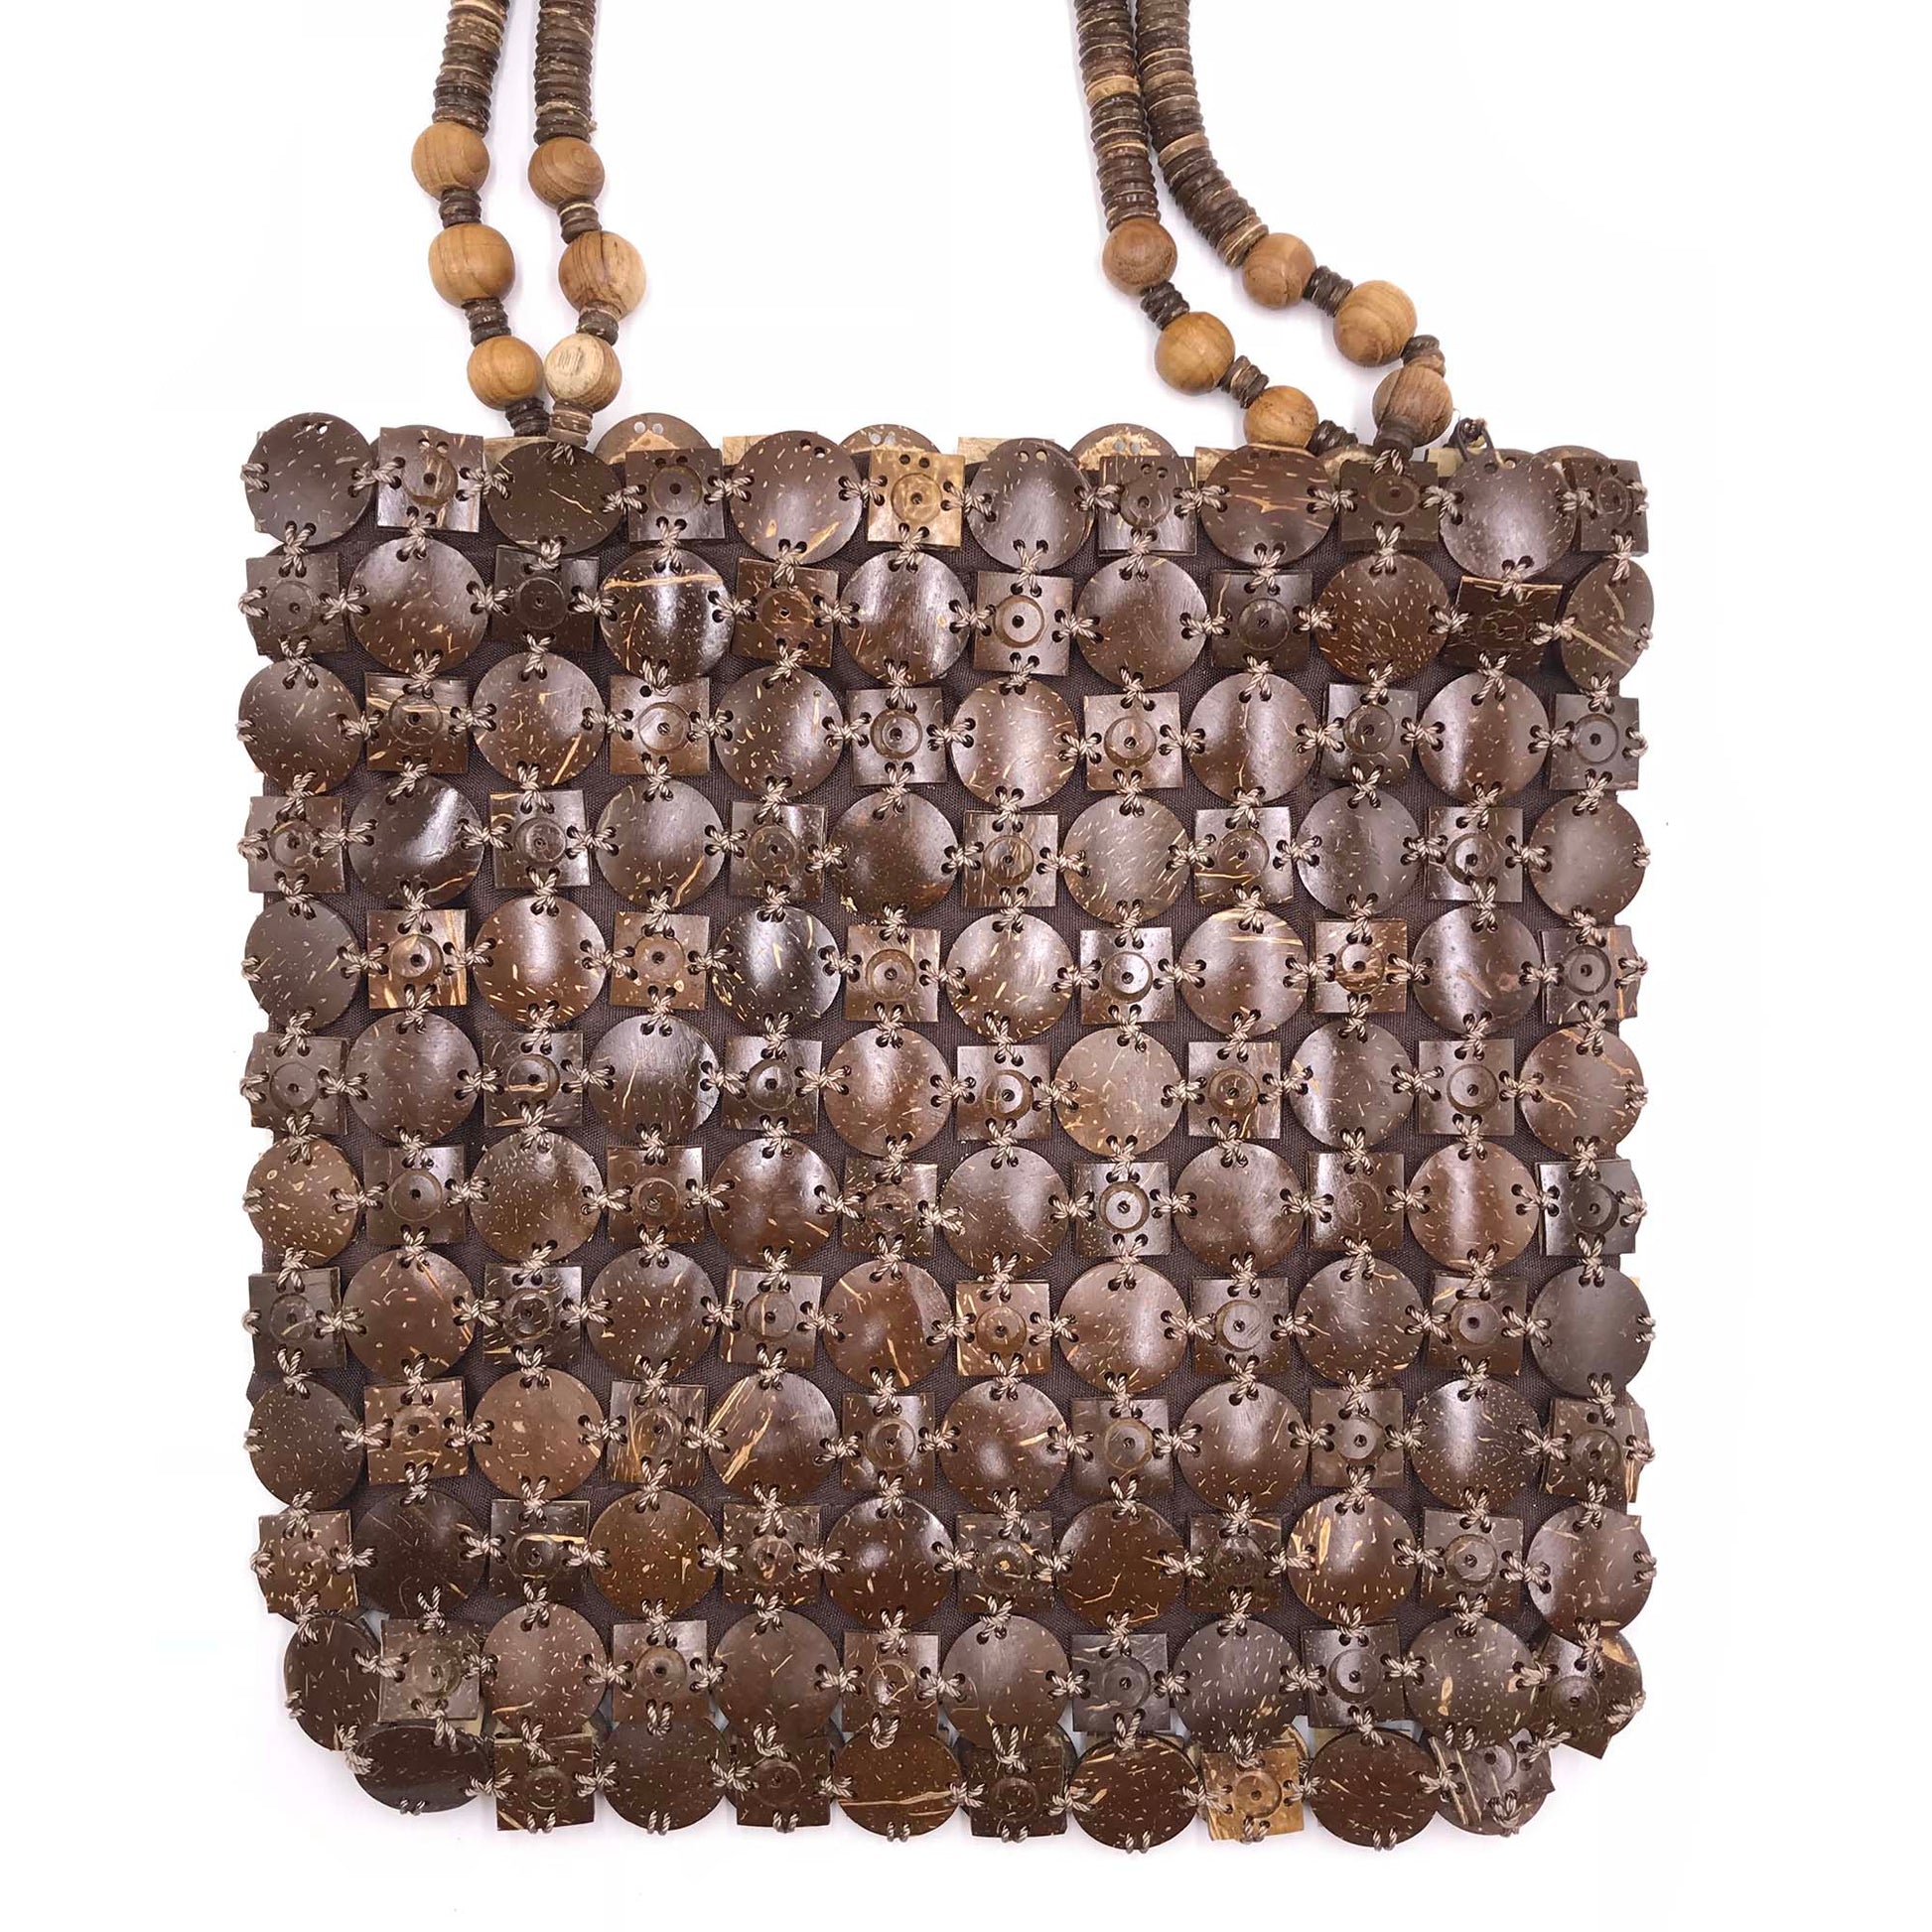 Hand-bag made from recycled coconut shells